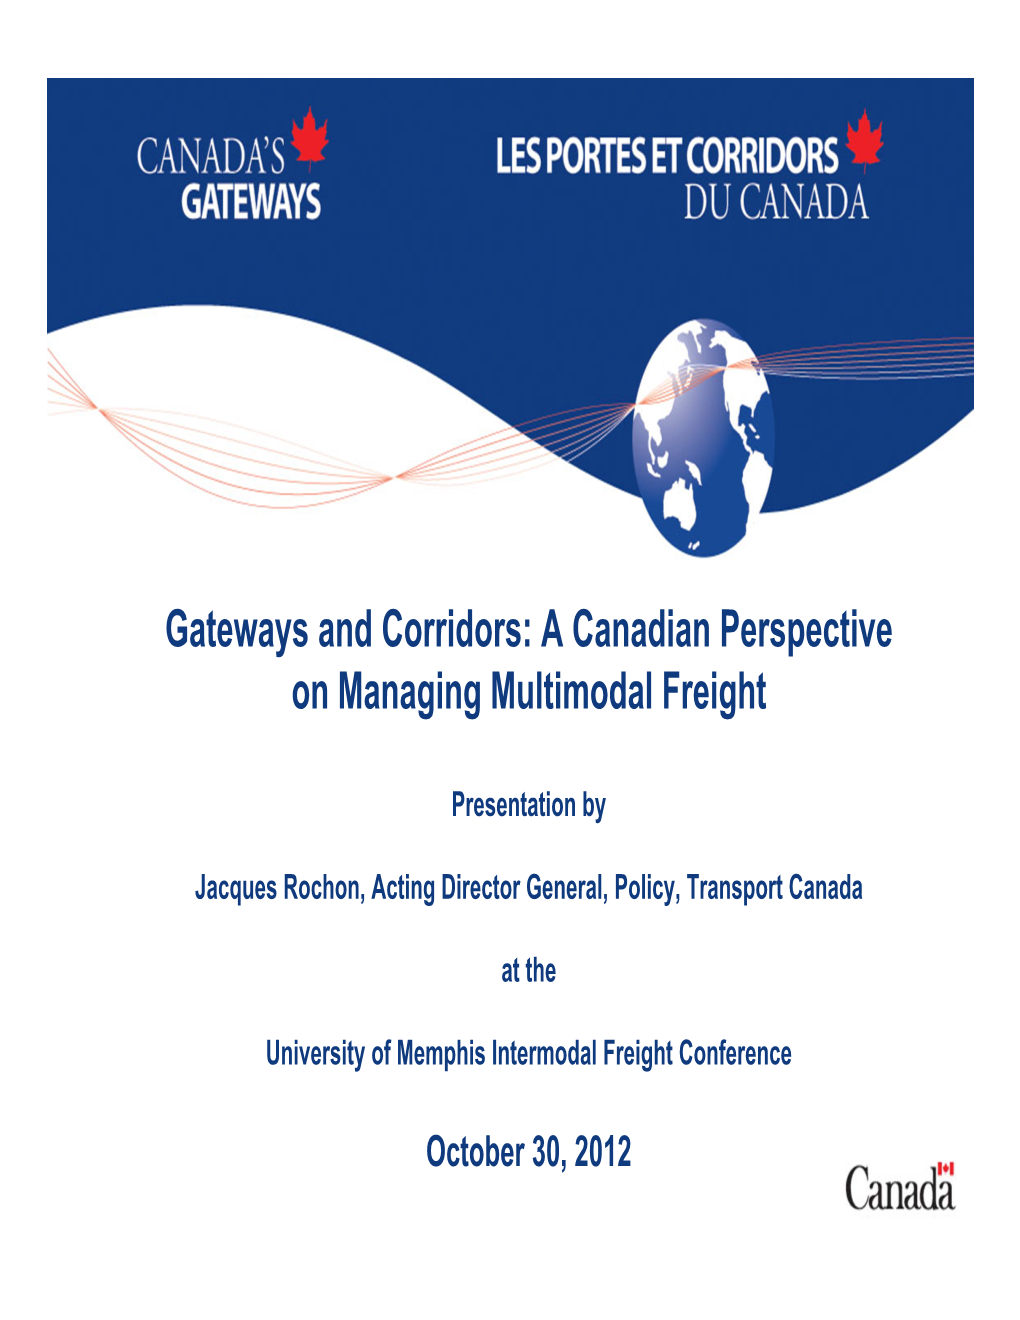 Gateways and Corridors: a Canadian Perspective on Managing Multimodal Freight